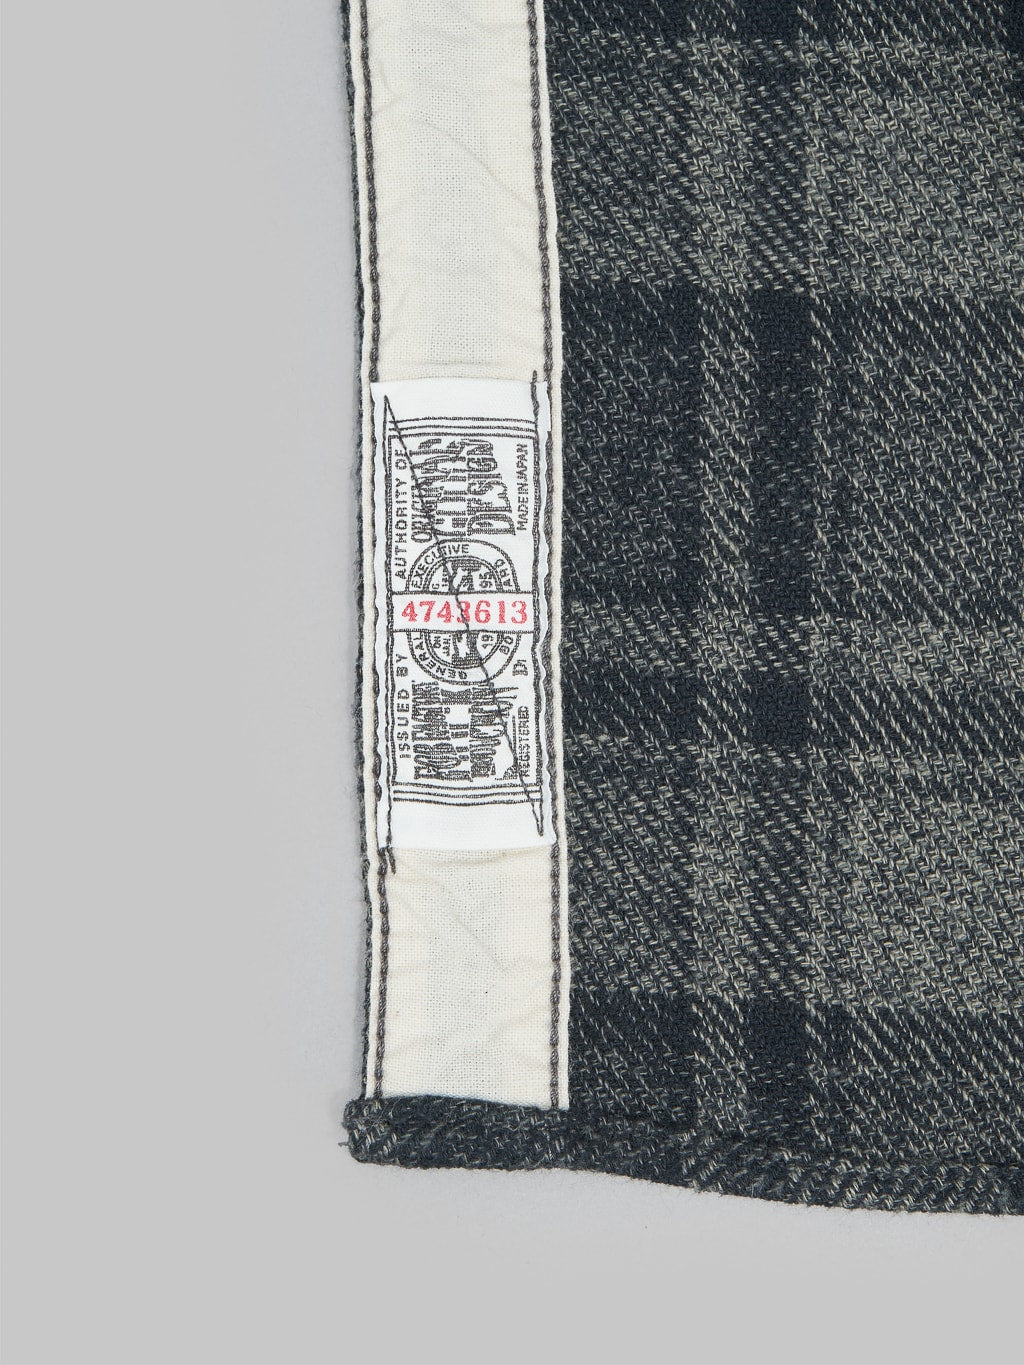 Fob Factory F3497 Nel Check Work flannel Shirt grey label